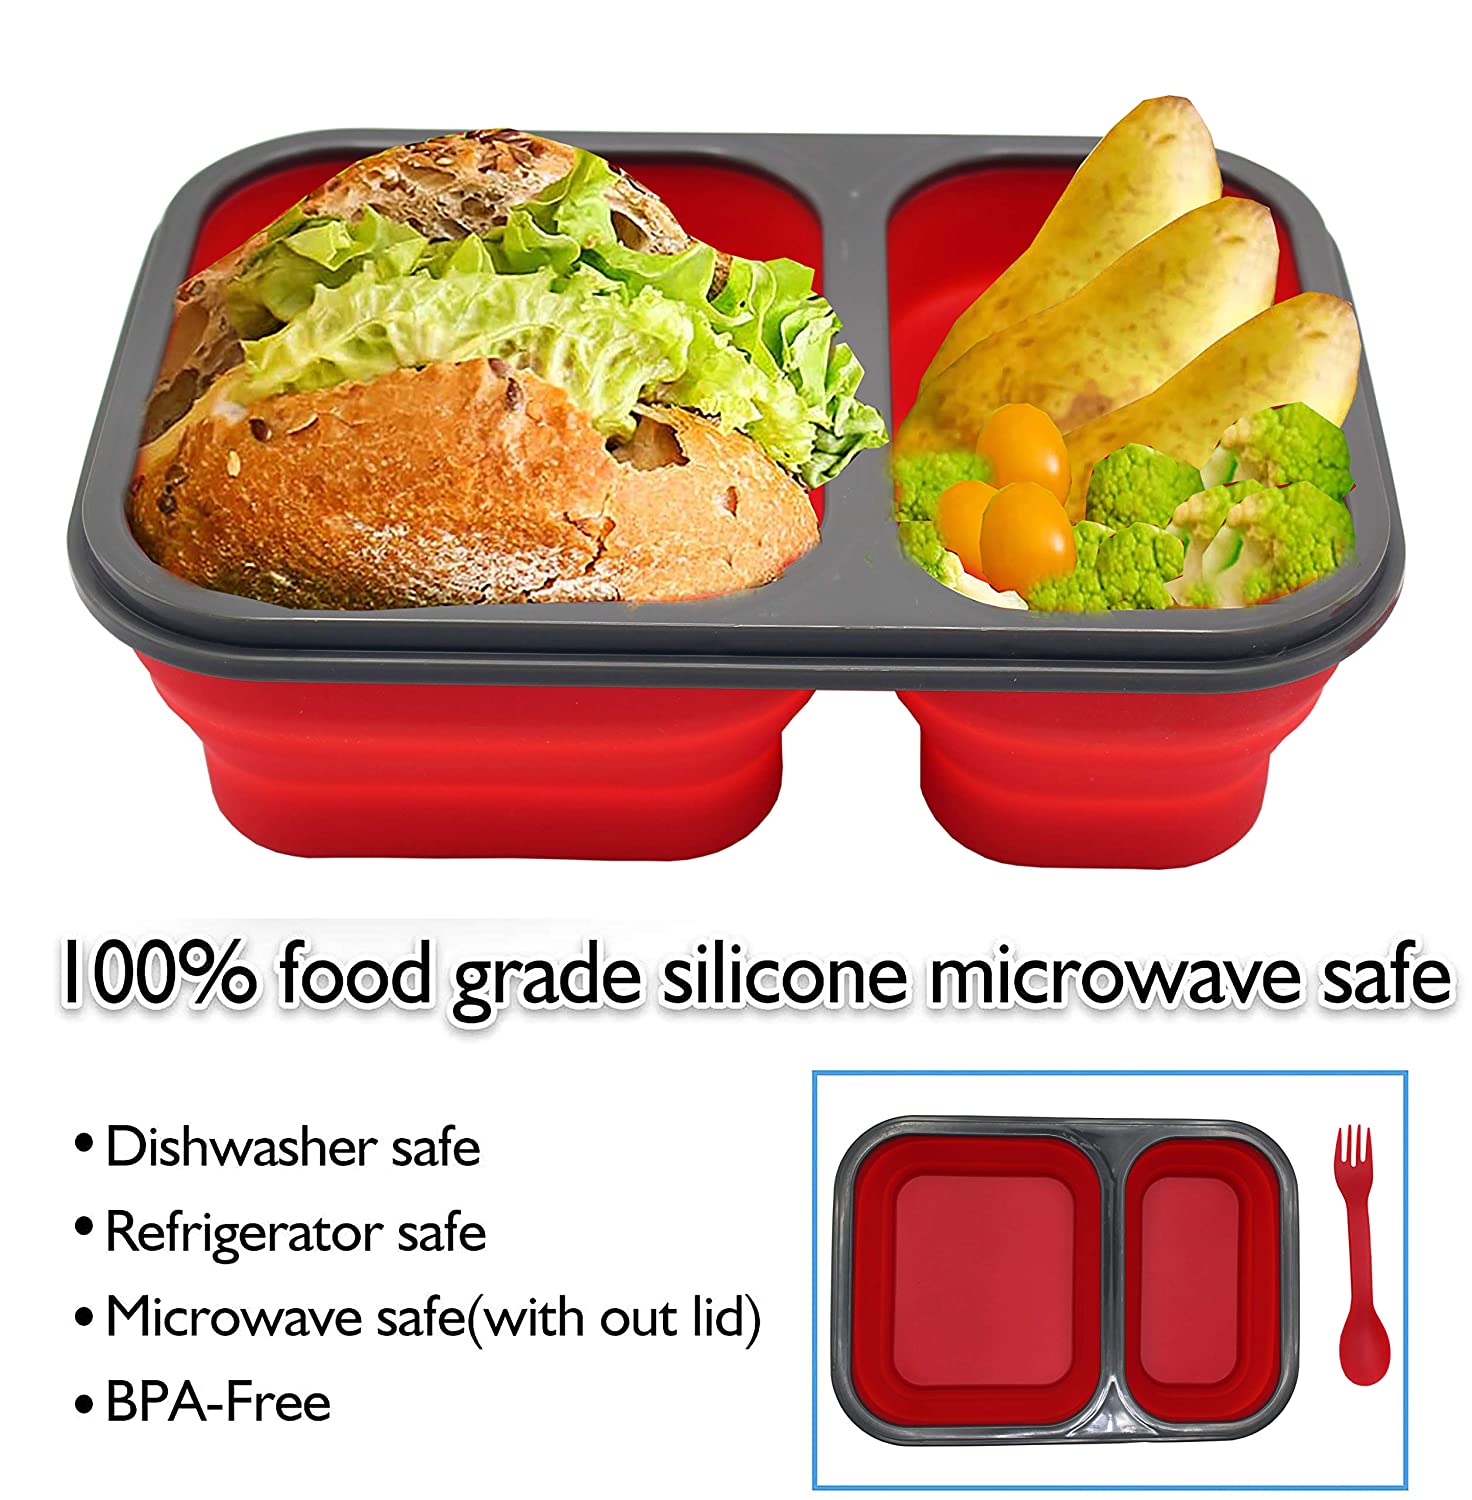 lunch box; expandable lunch box; collapsible lunch box; 2 compartment lunch box